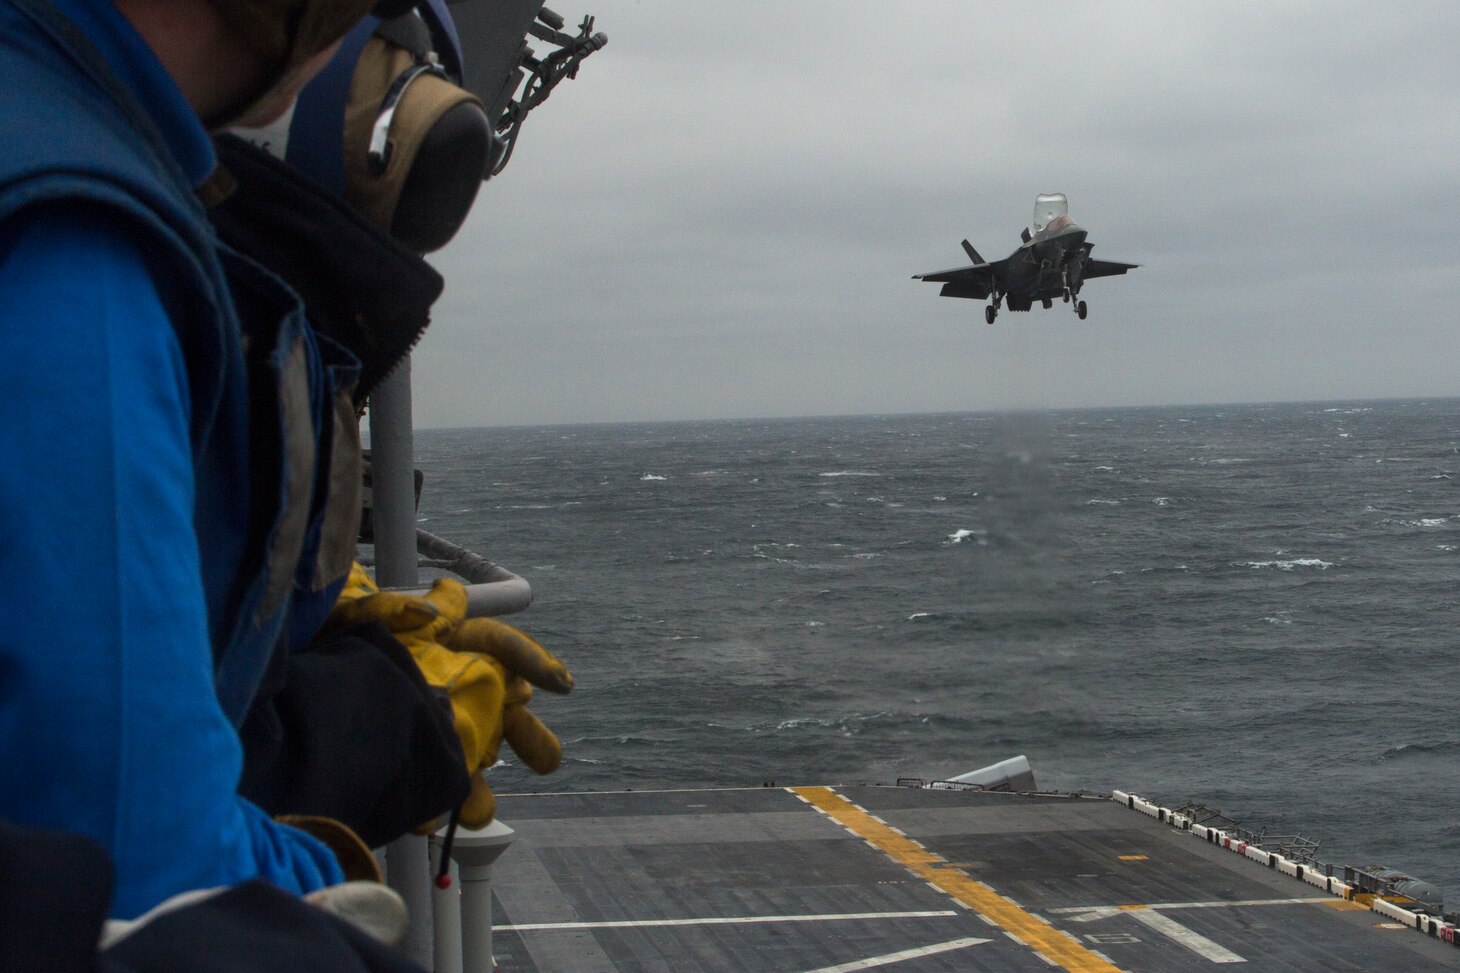 An F-35B Lighitng II performs deck landing qualifications on the USS Wasp (LHD-1), March 5, 2018. Marine Fighter Attack Squadron 121 embarked a detachment of F-35Bs on the USS Wasp for the 31st Marine Expeditionary Unit’s Spring Patrol 2018, marking the first operational deployment of the F-35B with a MEU. As the Marine Corps' only continuously forward-deployed MEU, the 31st MEU provides a flexible force ready to perform a wide range of military operations.